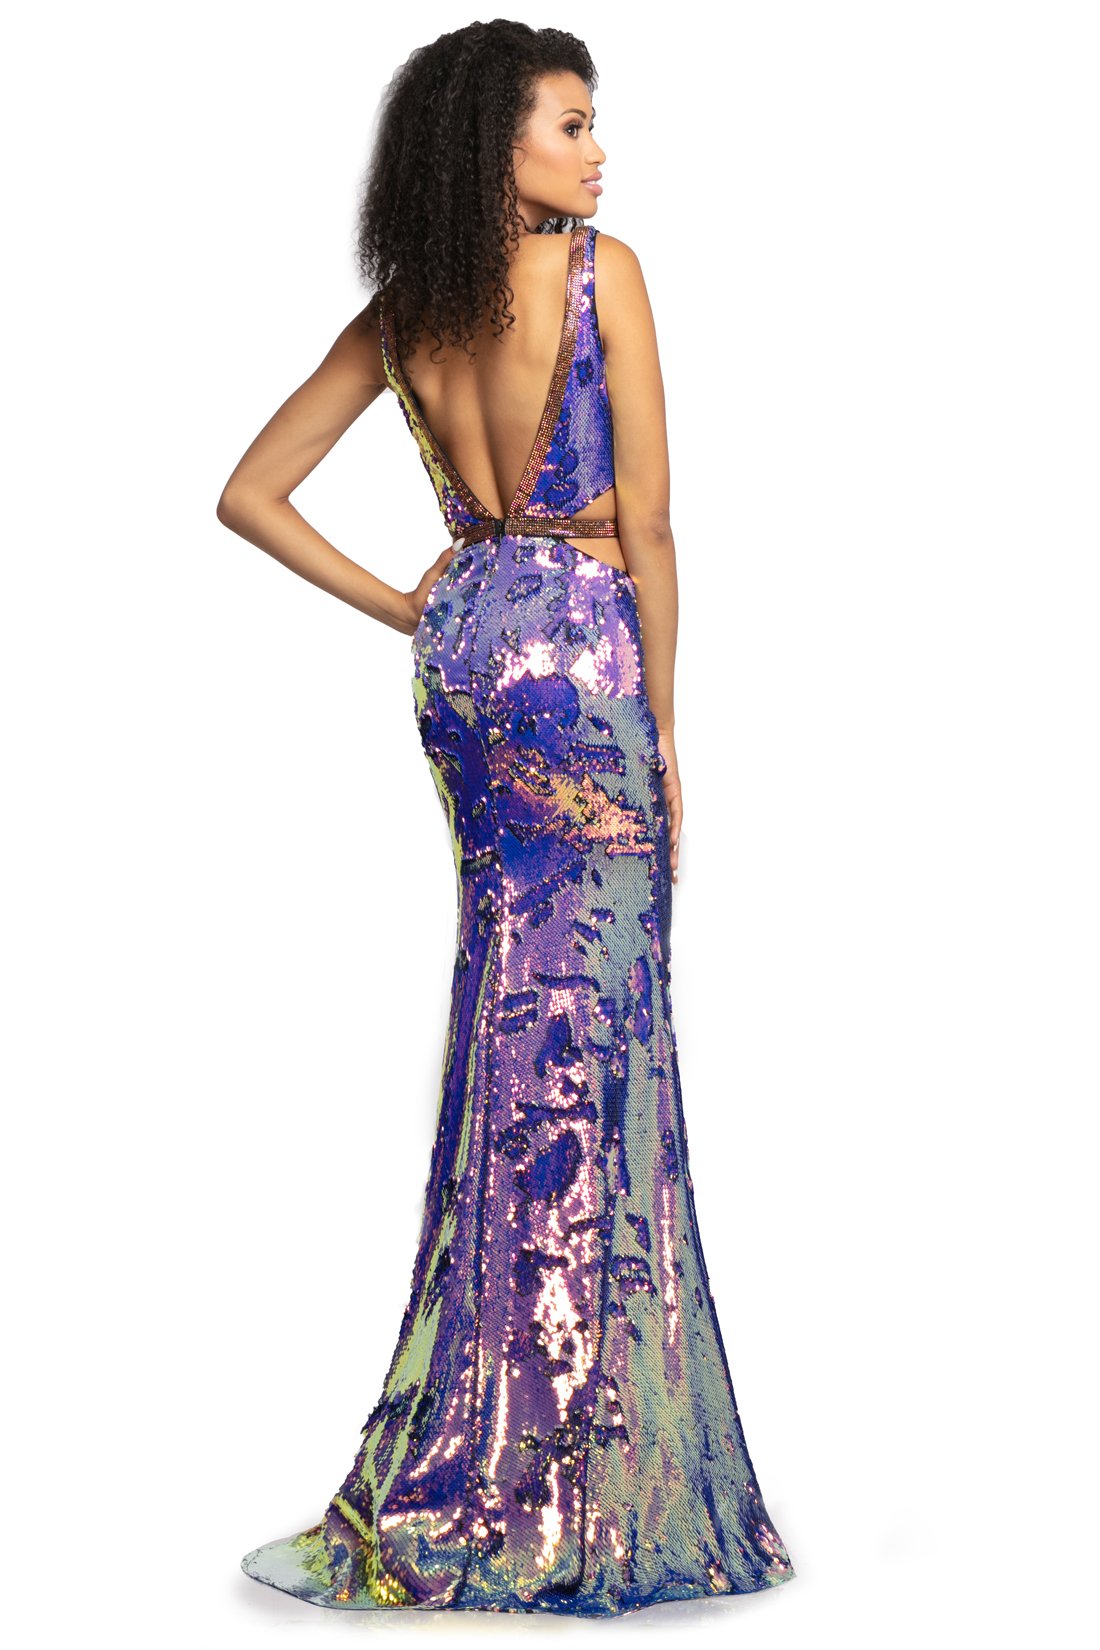 Johnathan Kayne 2092 is an Iridescent Shimmer Prom Dress, Pageant Gown & Formal Evening Wear.  This long fitted gown Features Iridescent Shimmer Reversible Sequin Material. Plunging neckline with mesh inserts. Rows of Crystal Embellishments line the neckline and side cutout panels. Open V Back with Embellishments. 